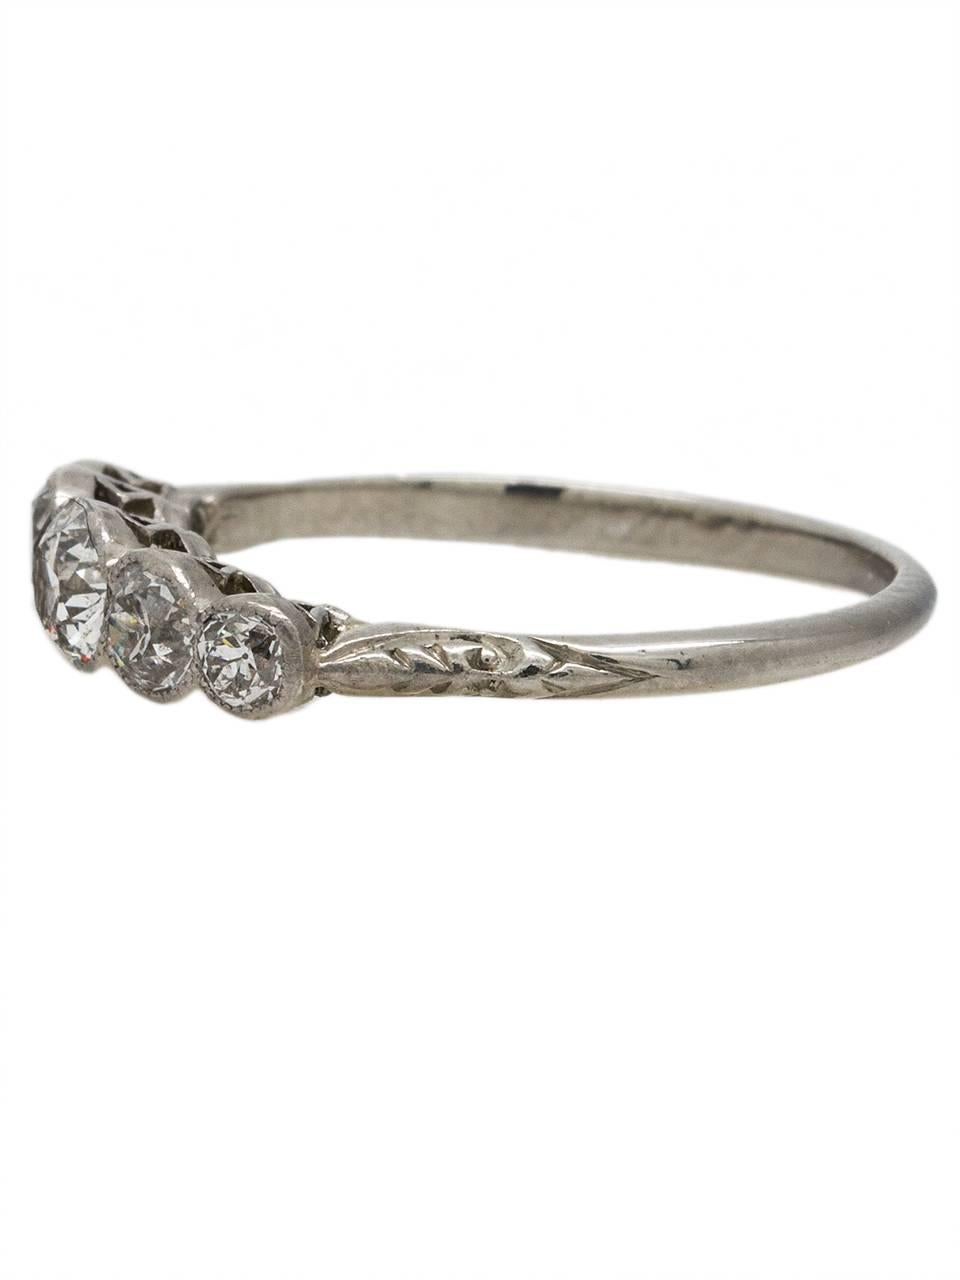 Edwardian Platinum Diamond Band 0.60 Carat Old European Cuts, circa 1910s In Excellent Condition For Sale In West Hollywood, CA